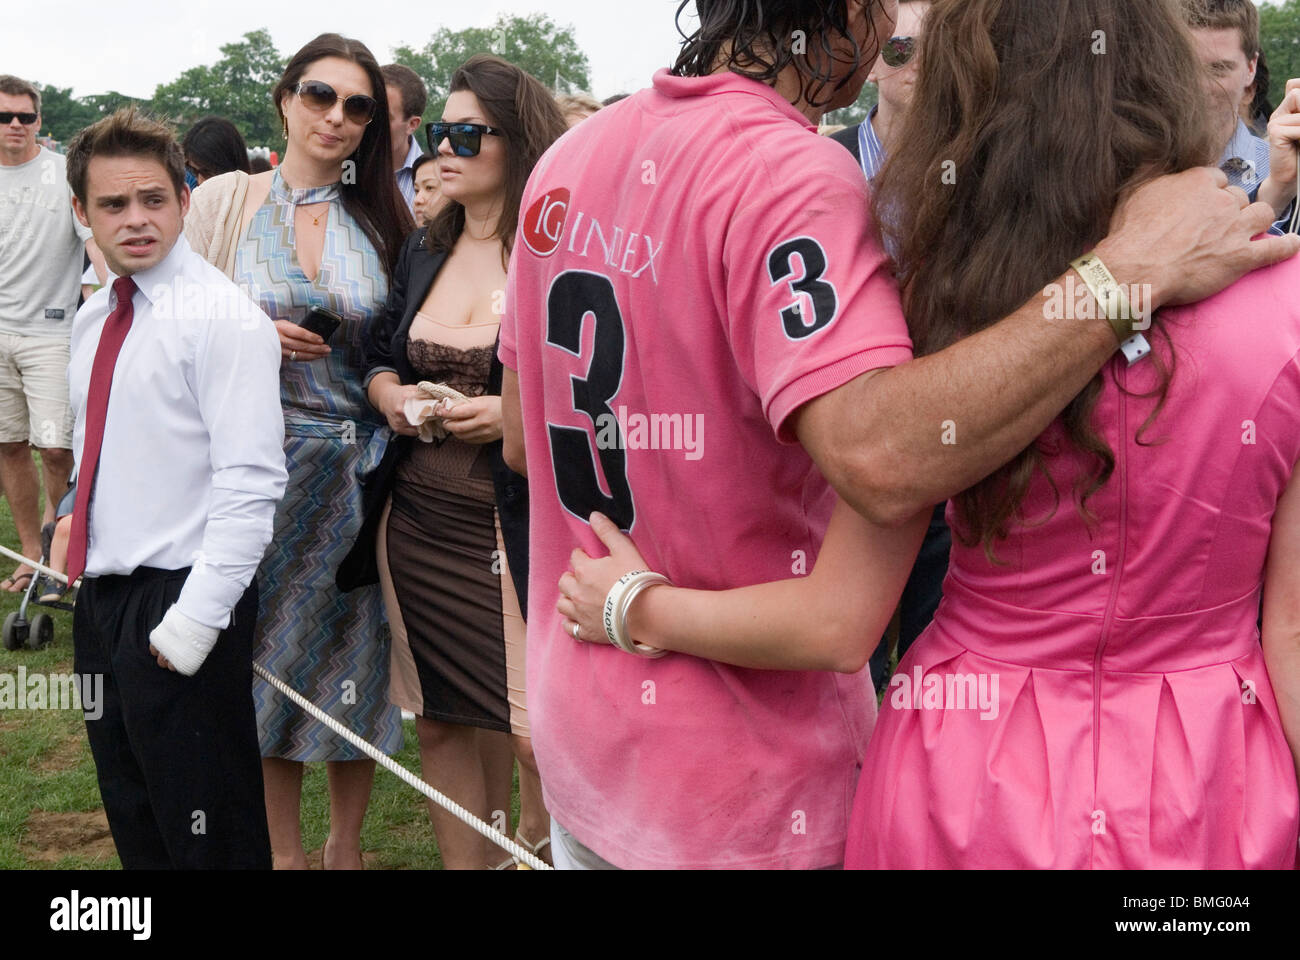 Polo players with girl fan. Polo in the Park. Hurlingham Park Fulham London Uk  Fans meet the players. HOMER SYKES Stock Photo